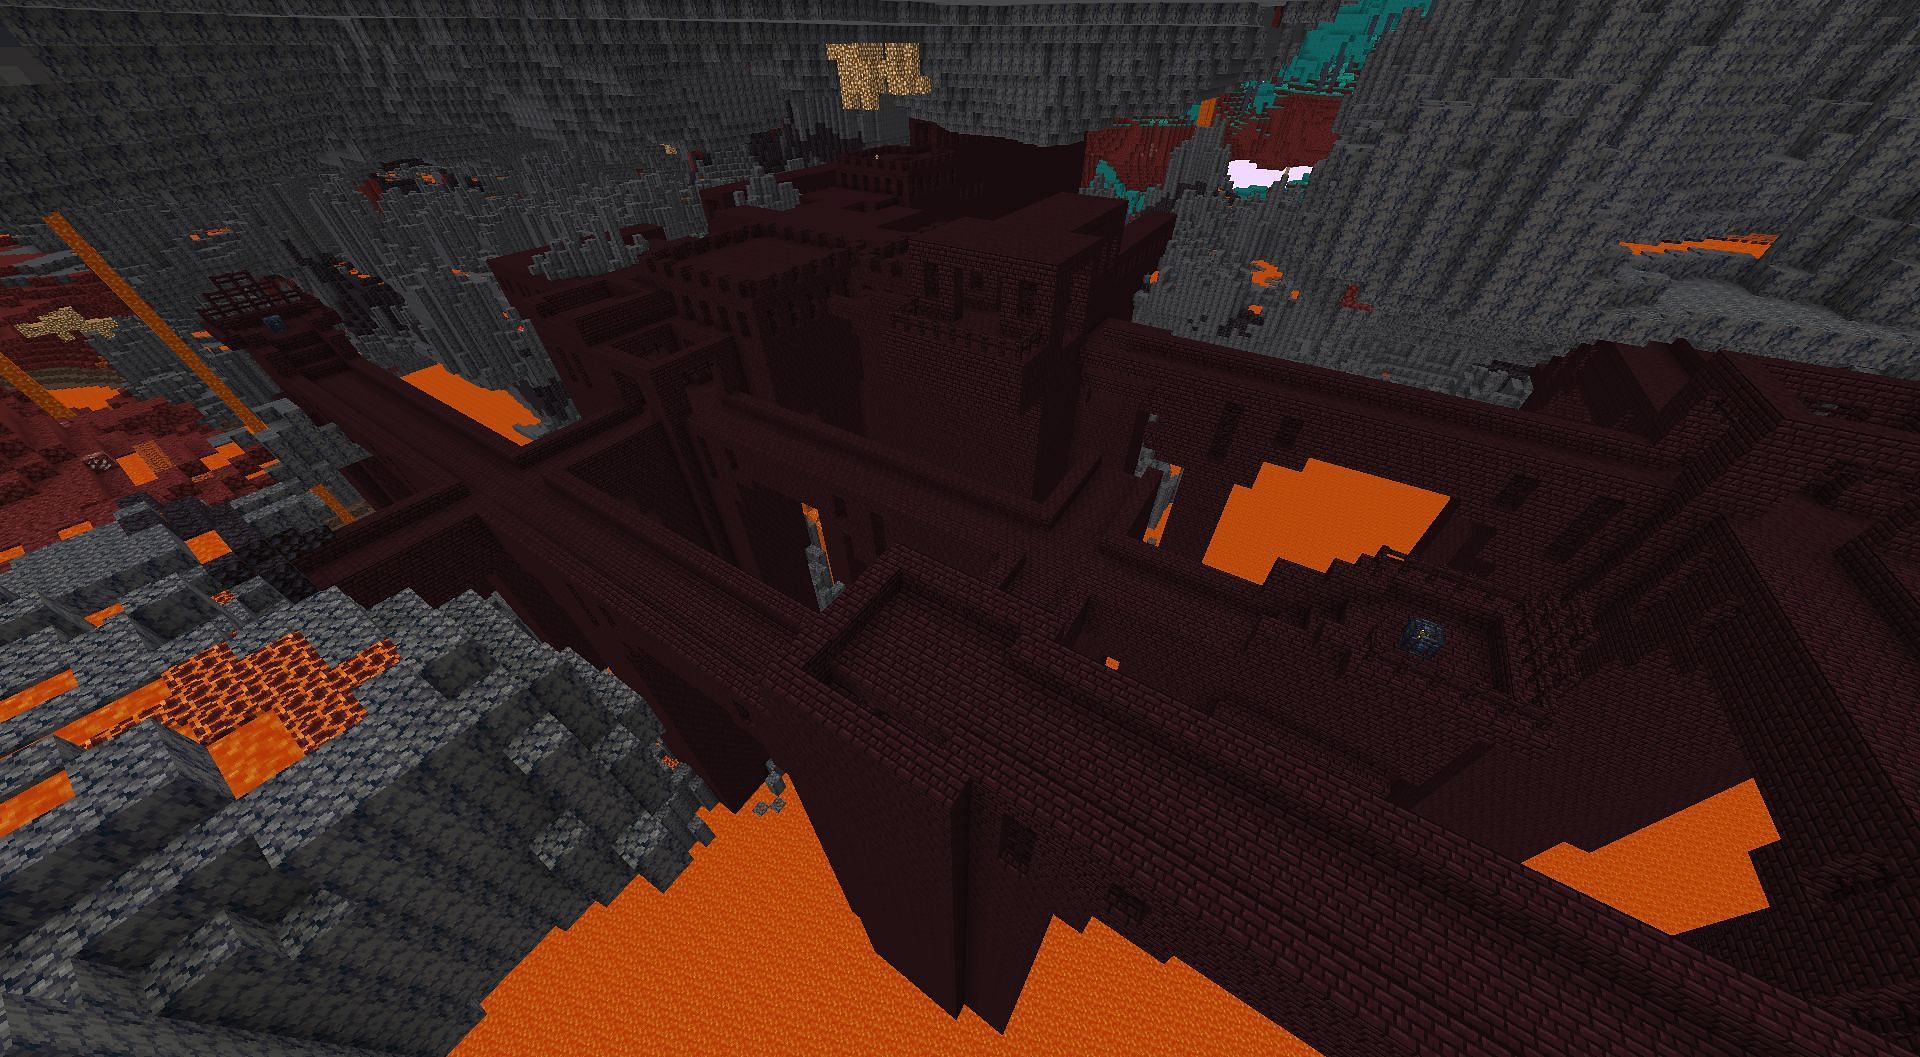 Nether Fortress in Minecraft 1.19 update (Image via Mojang)